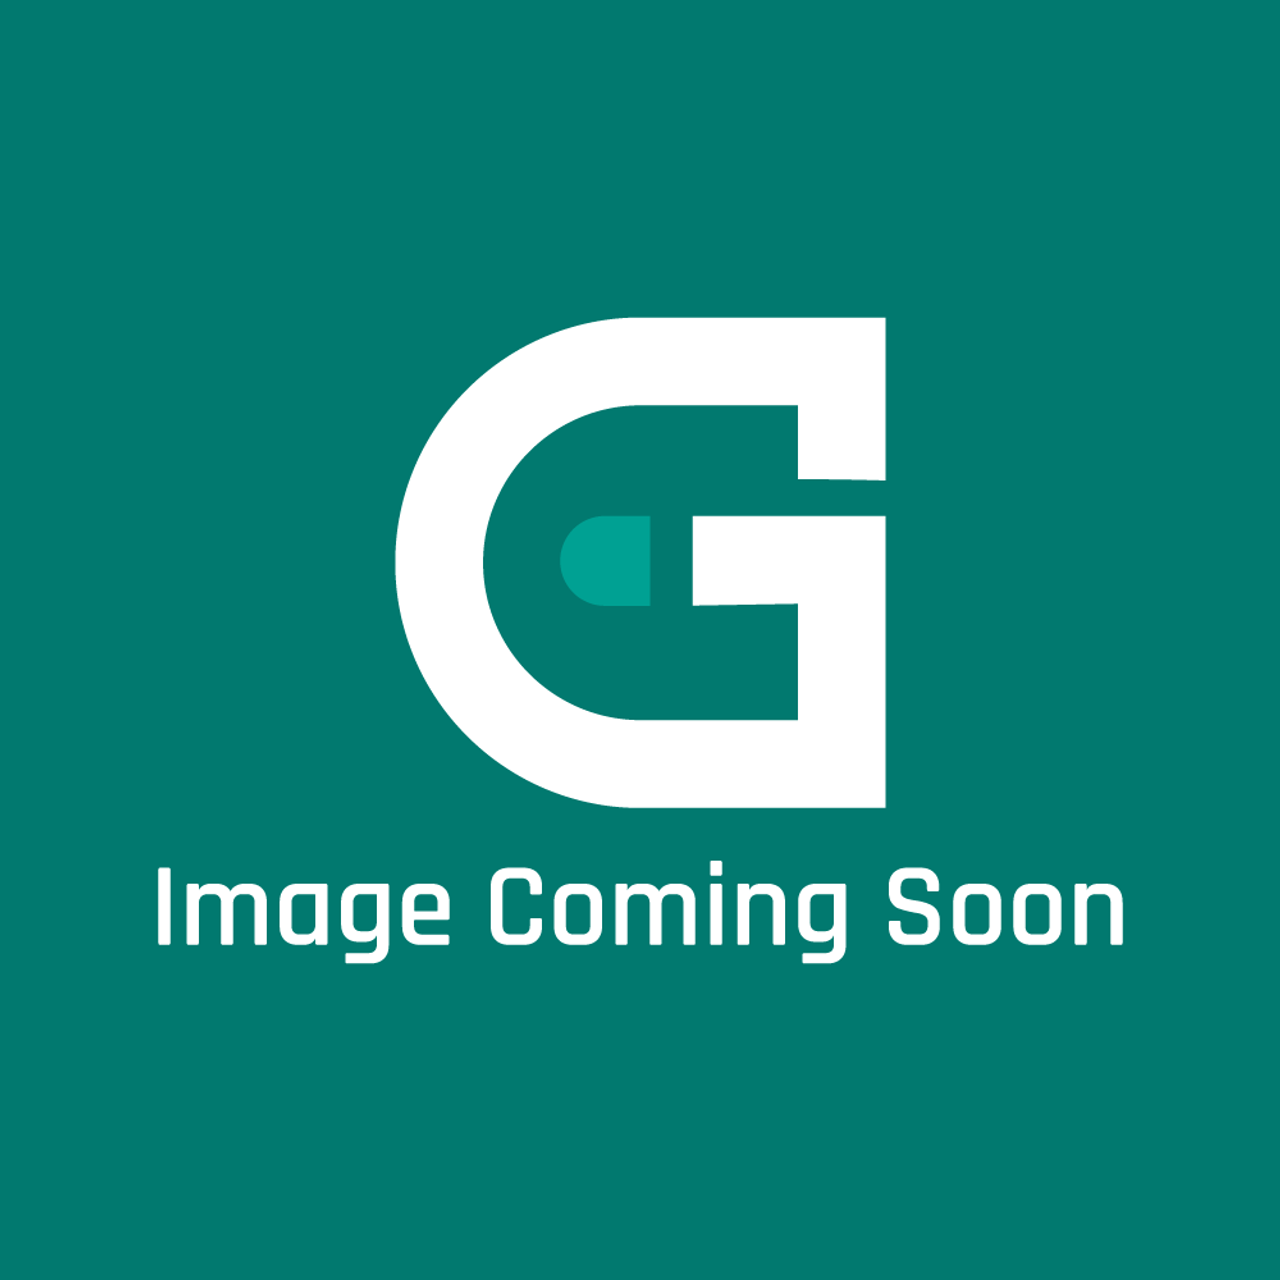 Viking G40010640 - SPARK IGNITOR WIRE - Image Coming Soon!